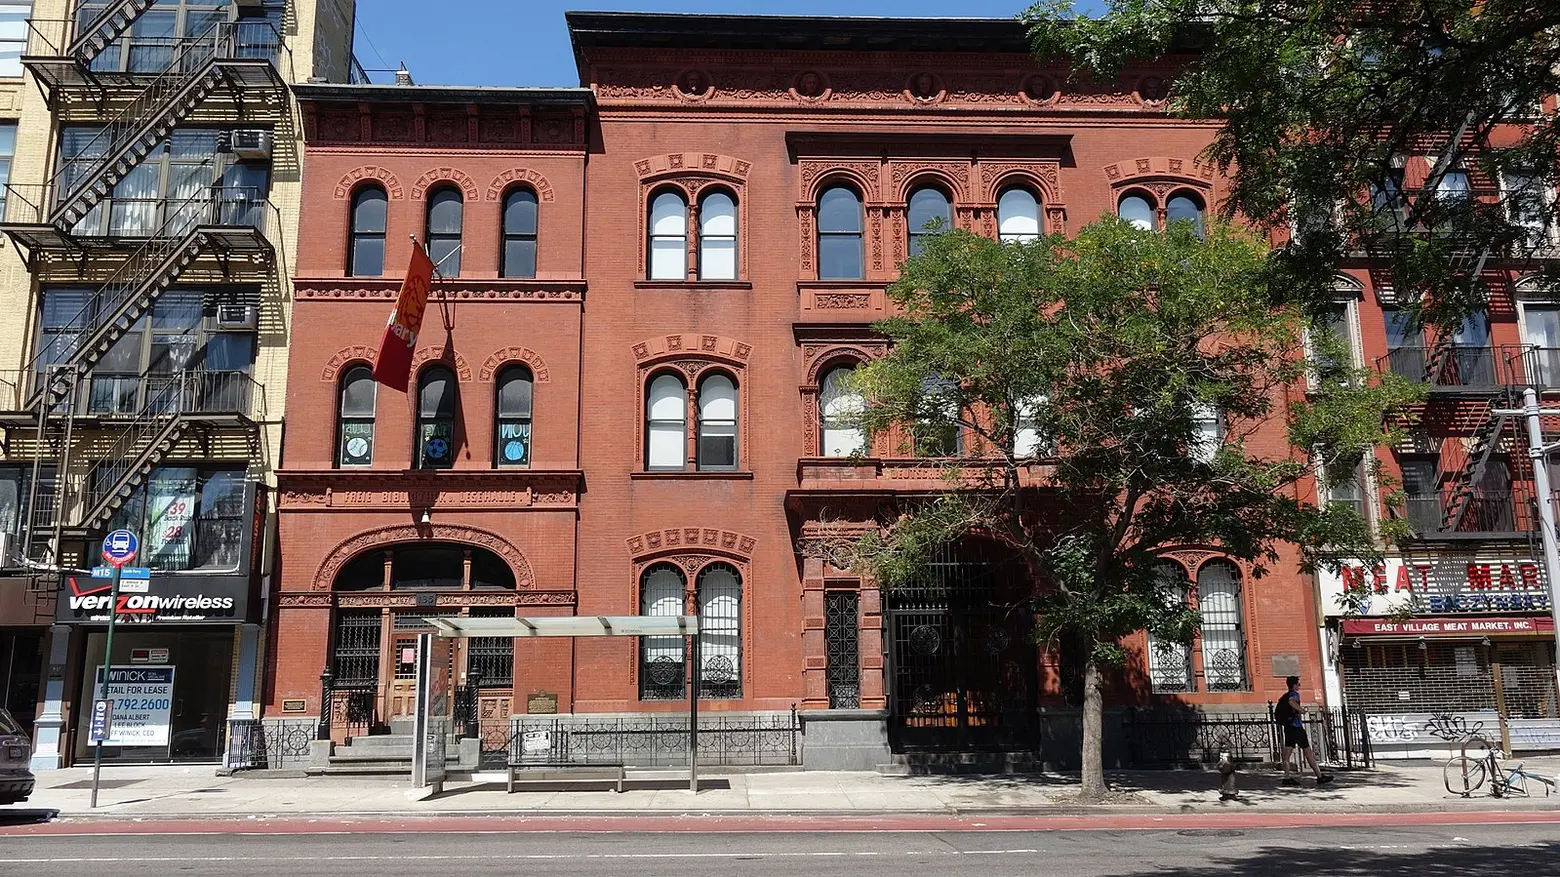 Co-working firm The Wing to lease the East Village’s former Stuyvesant Polyclinic building